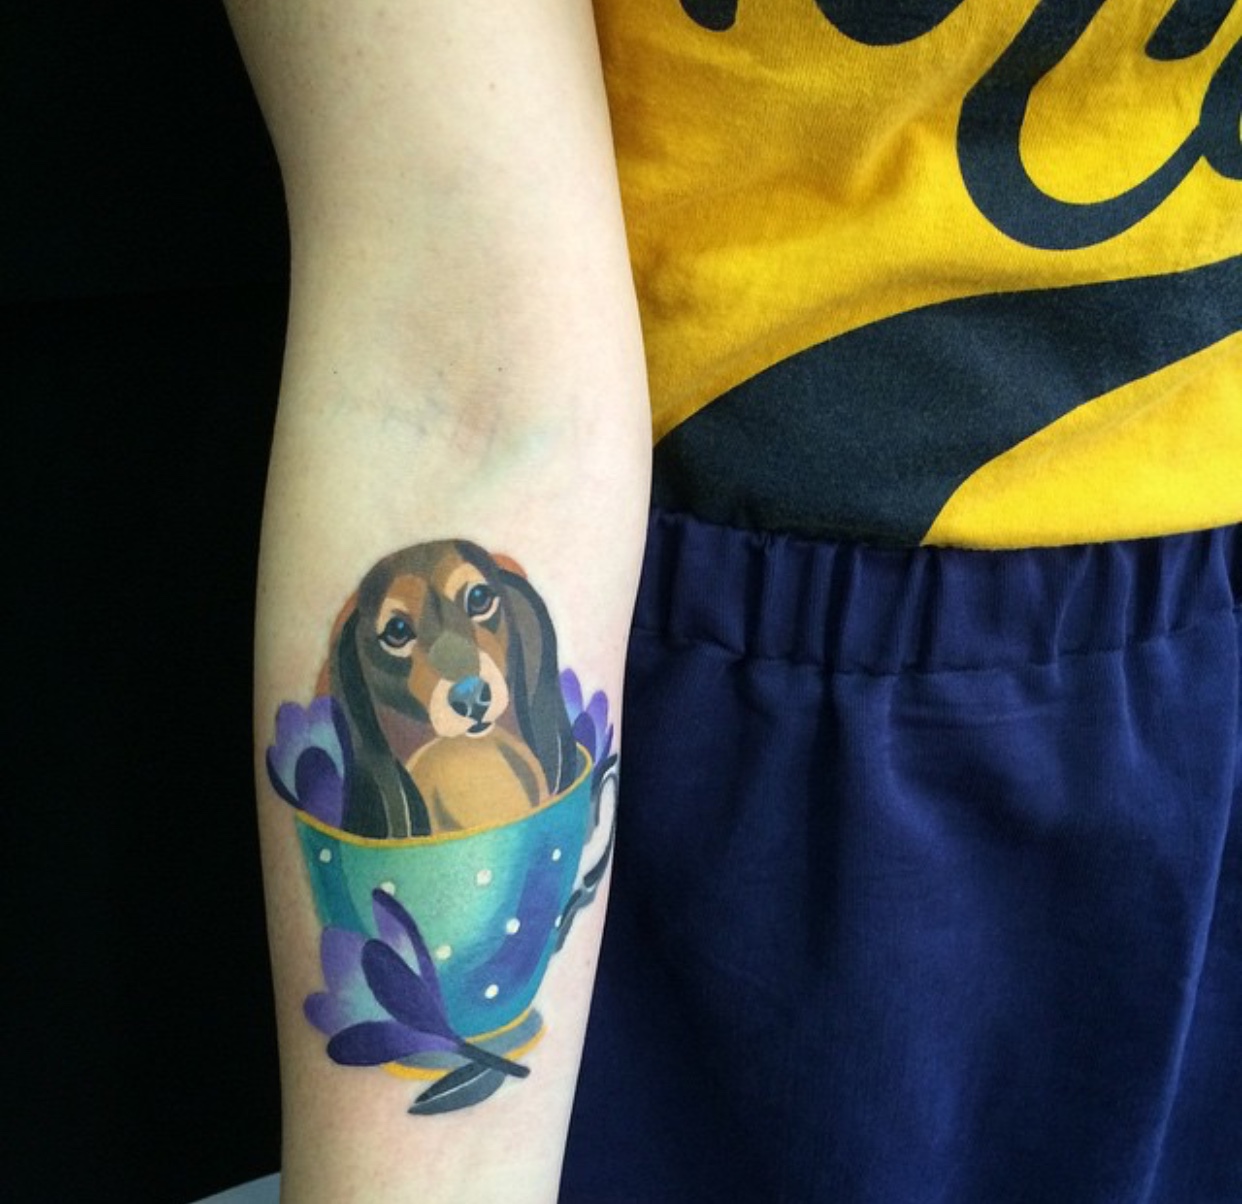 Dachshund in cup tattoo on arm